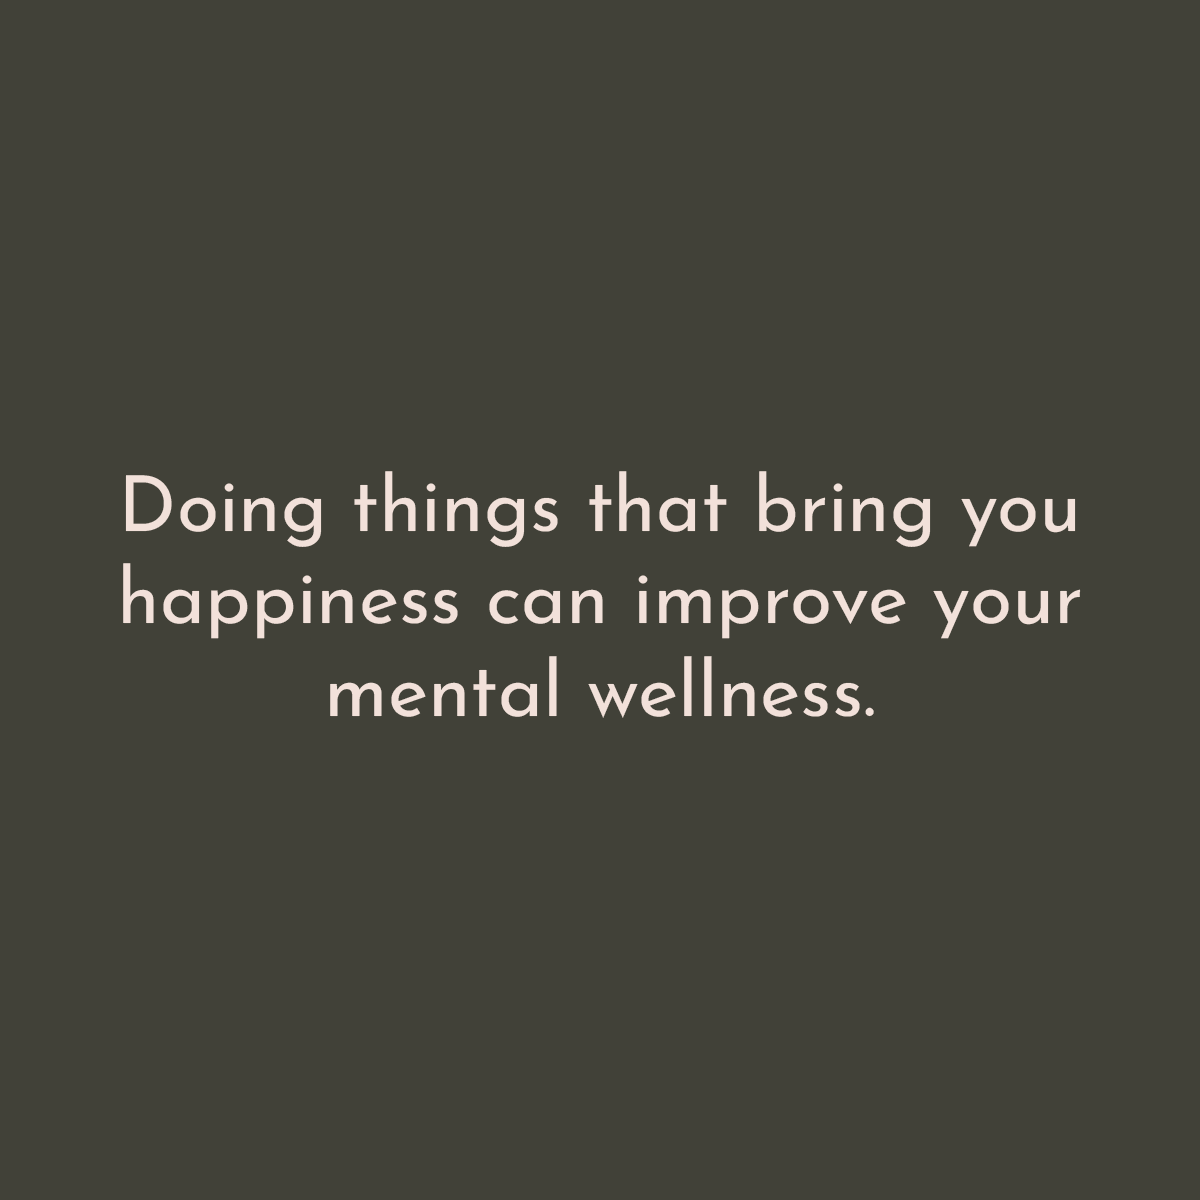 Doing things that bring you happiness can improve your mental wellness.